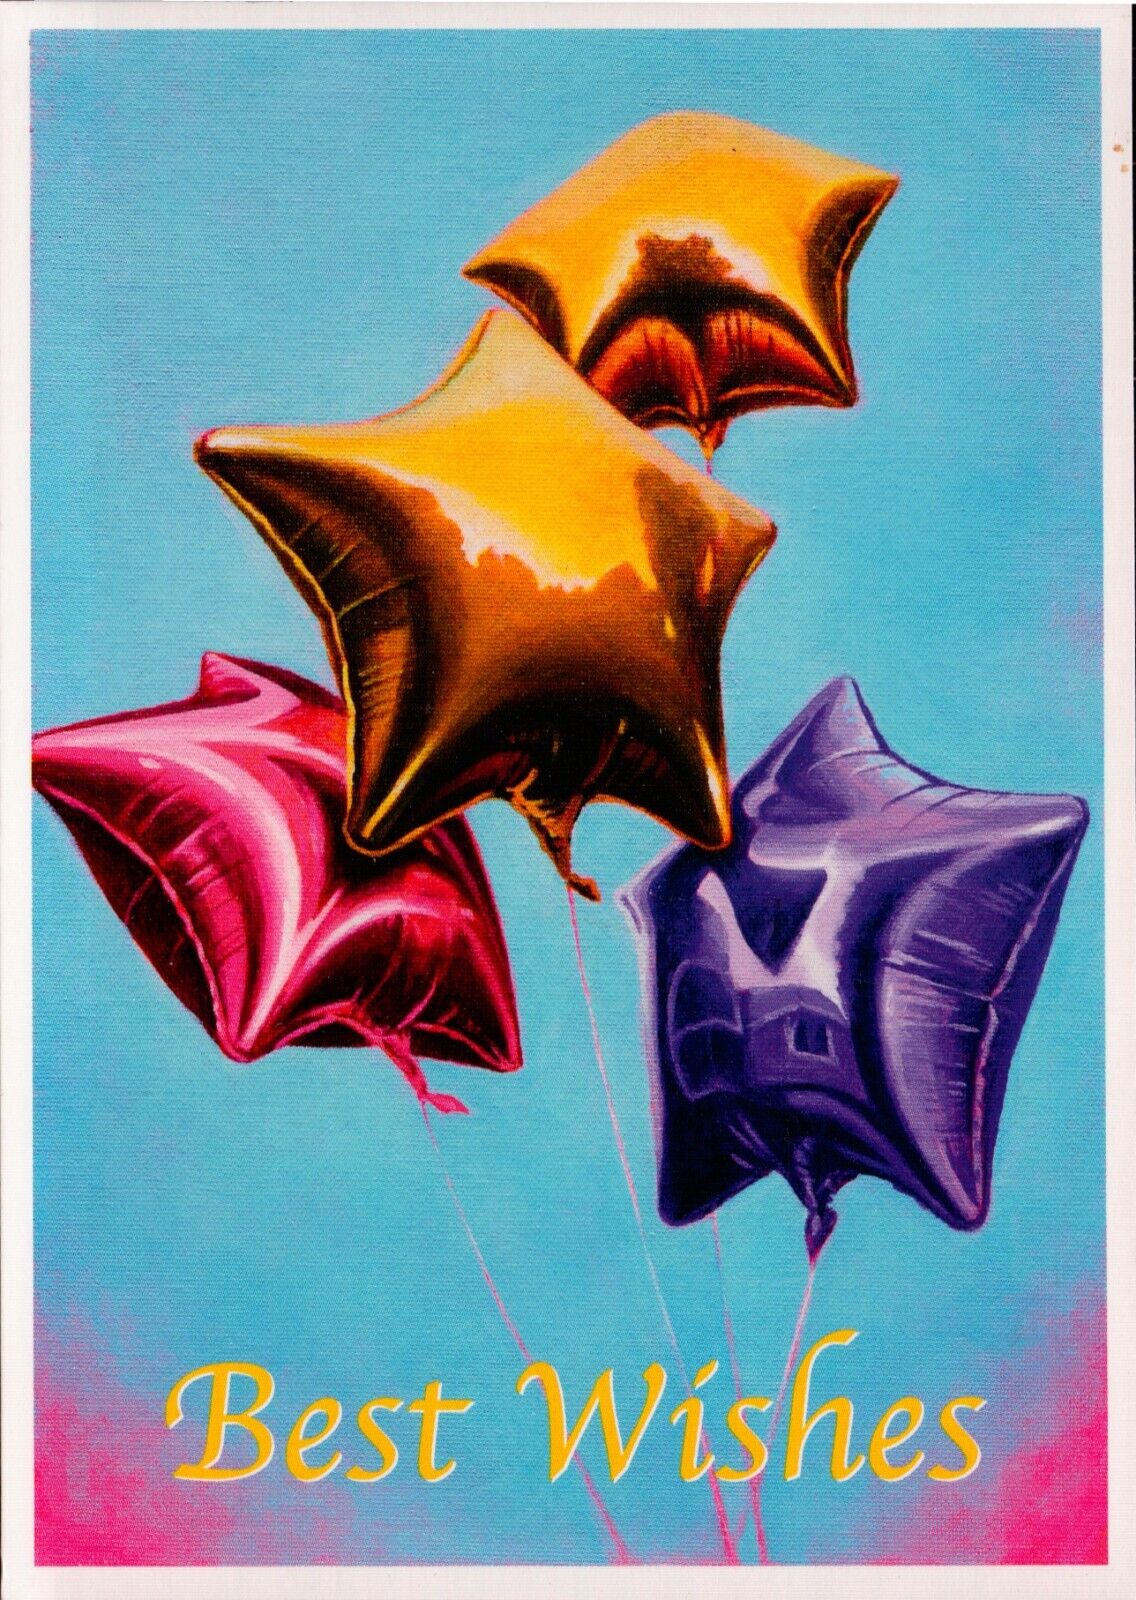 Postcard Best Wishes Celebration Balloons from painting by Mariam Pare